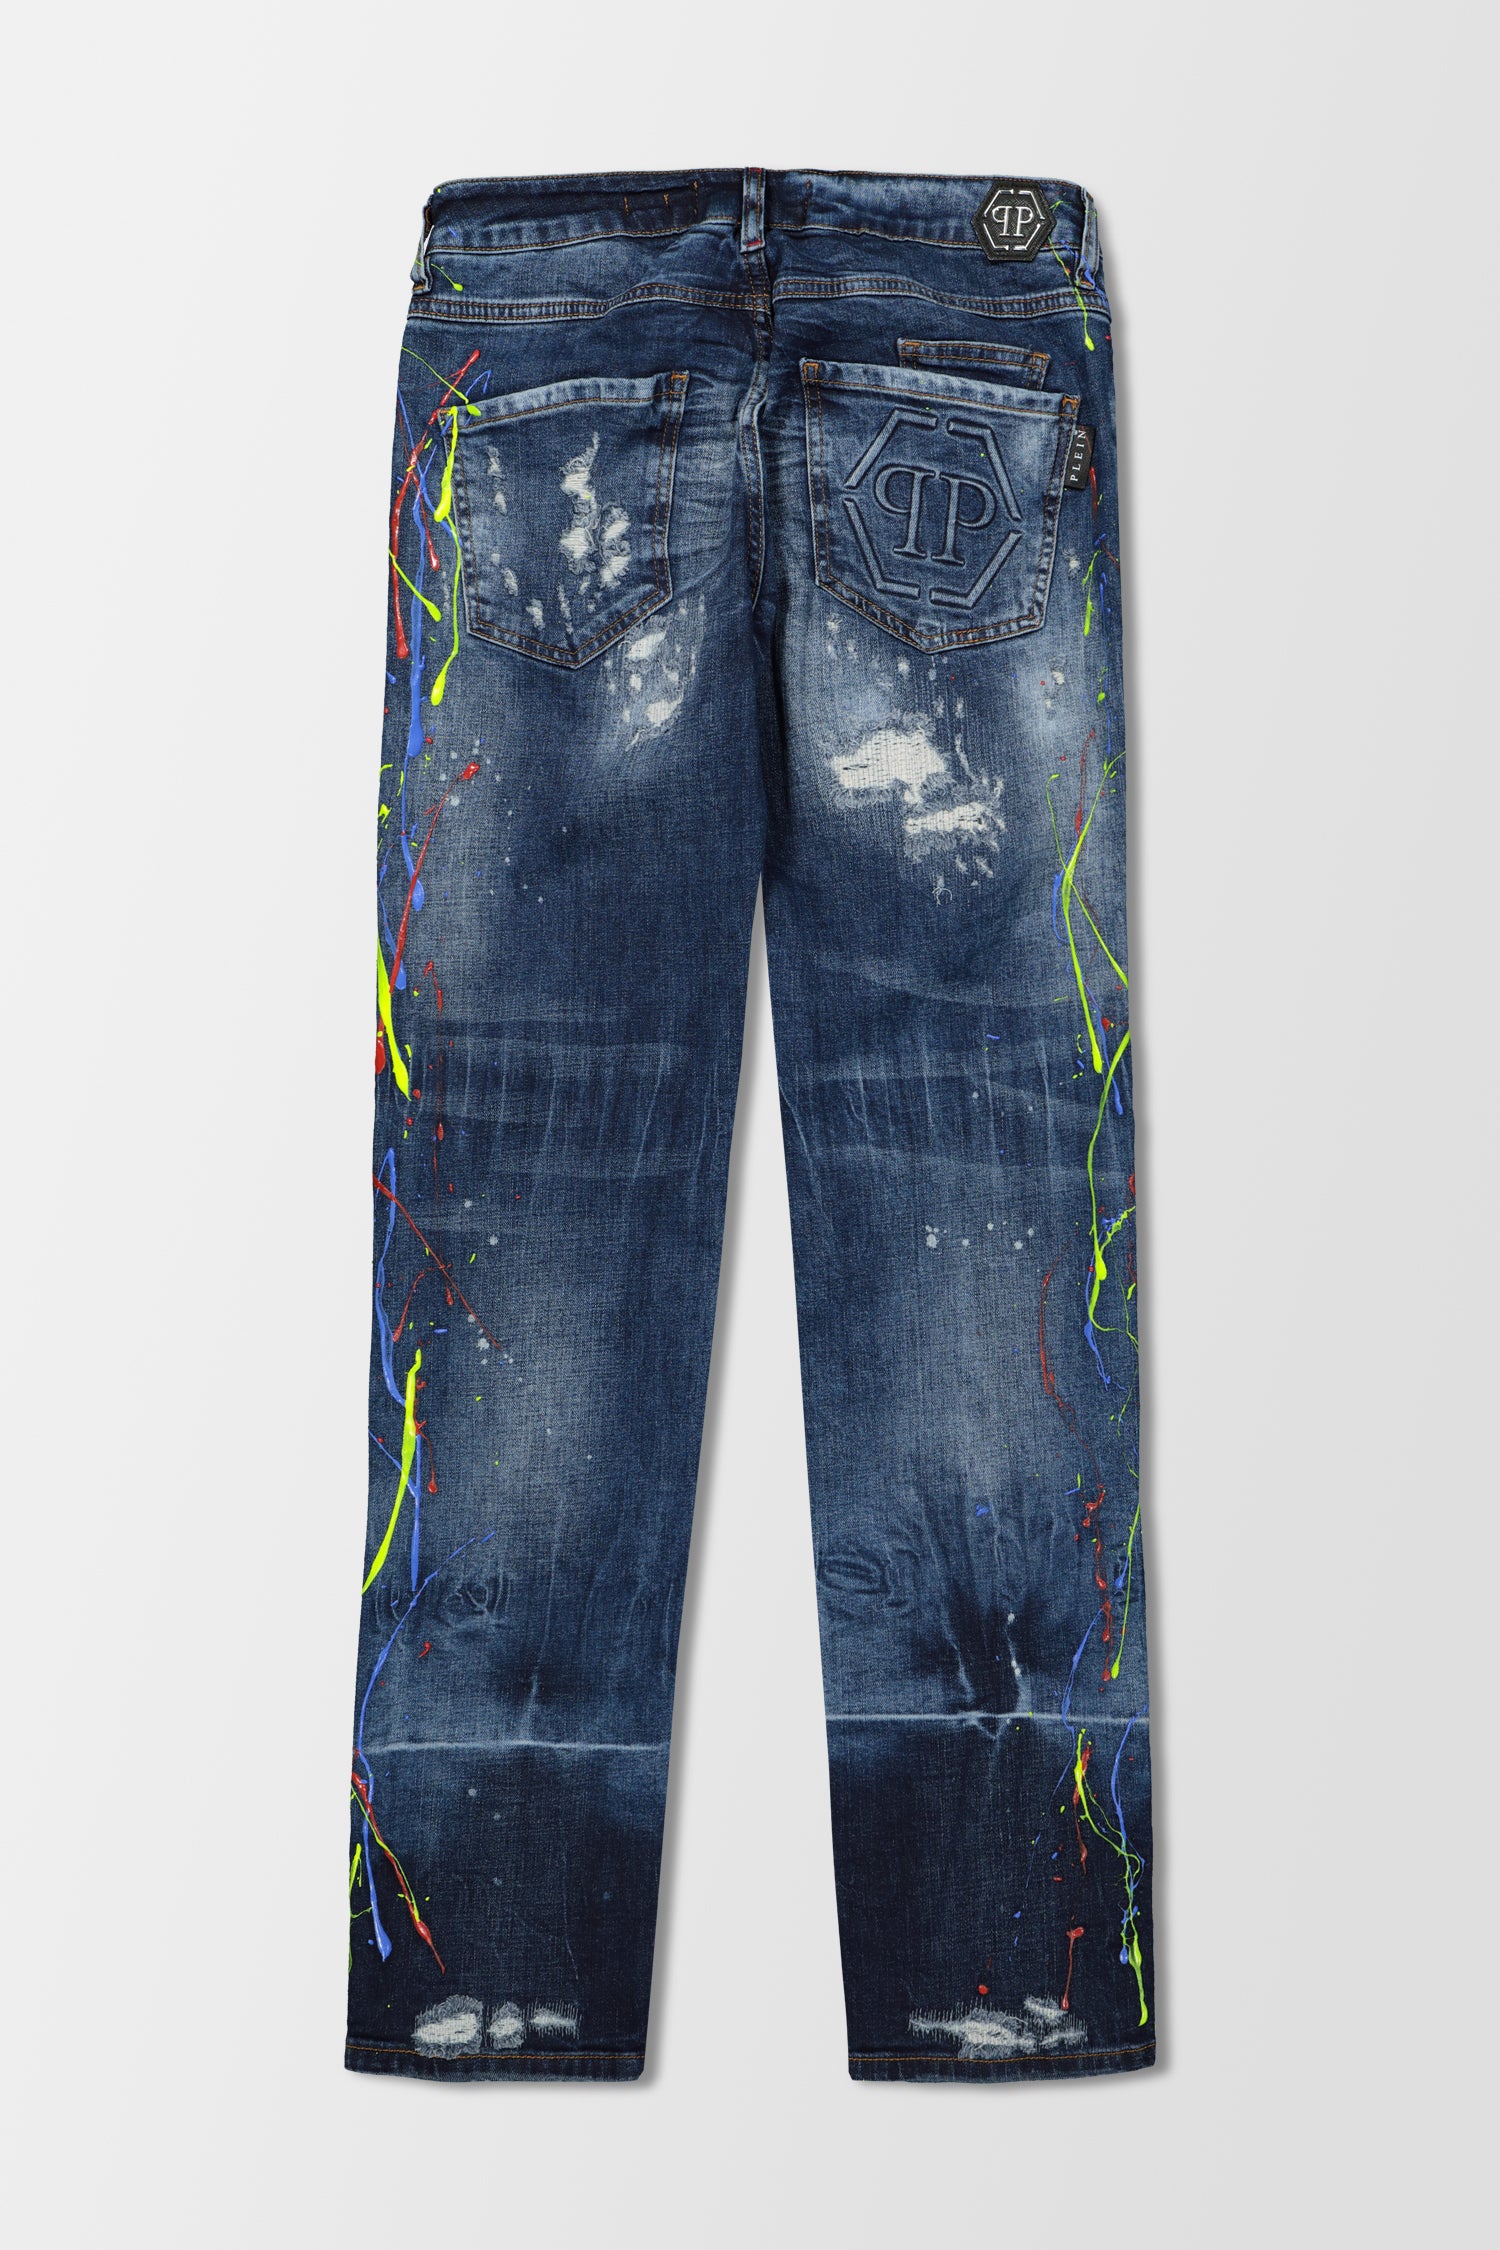 Philipp Plein Miss You Straight Supreme Painted Jeans